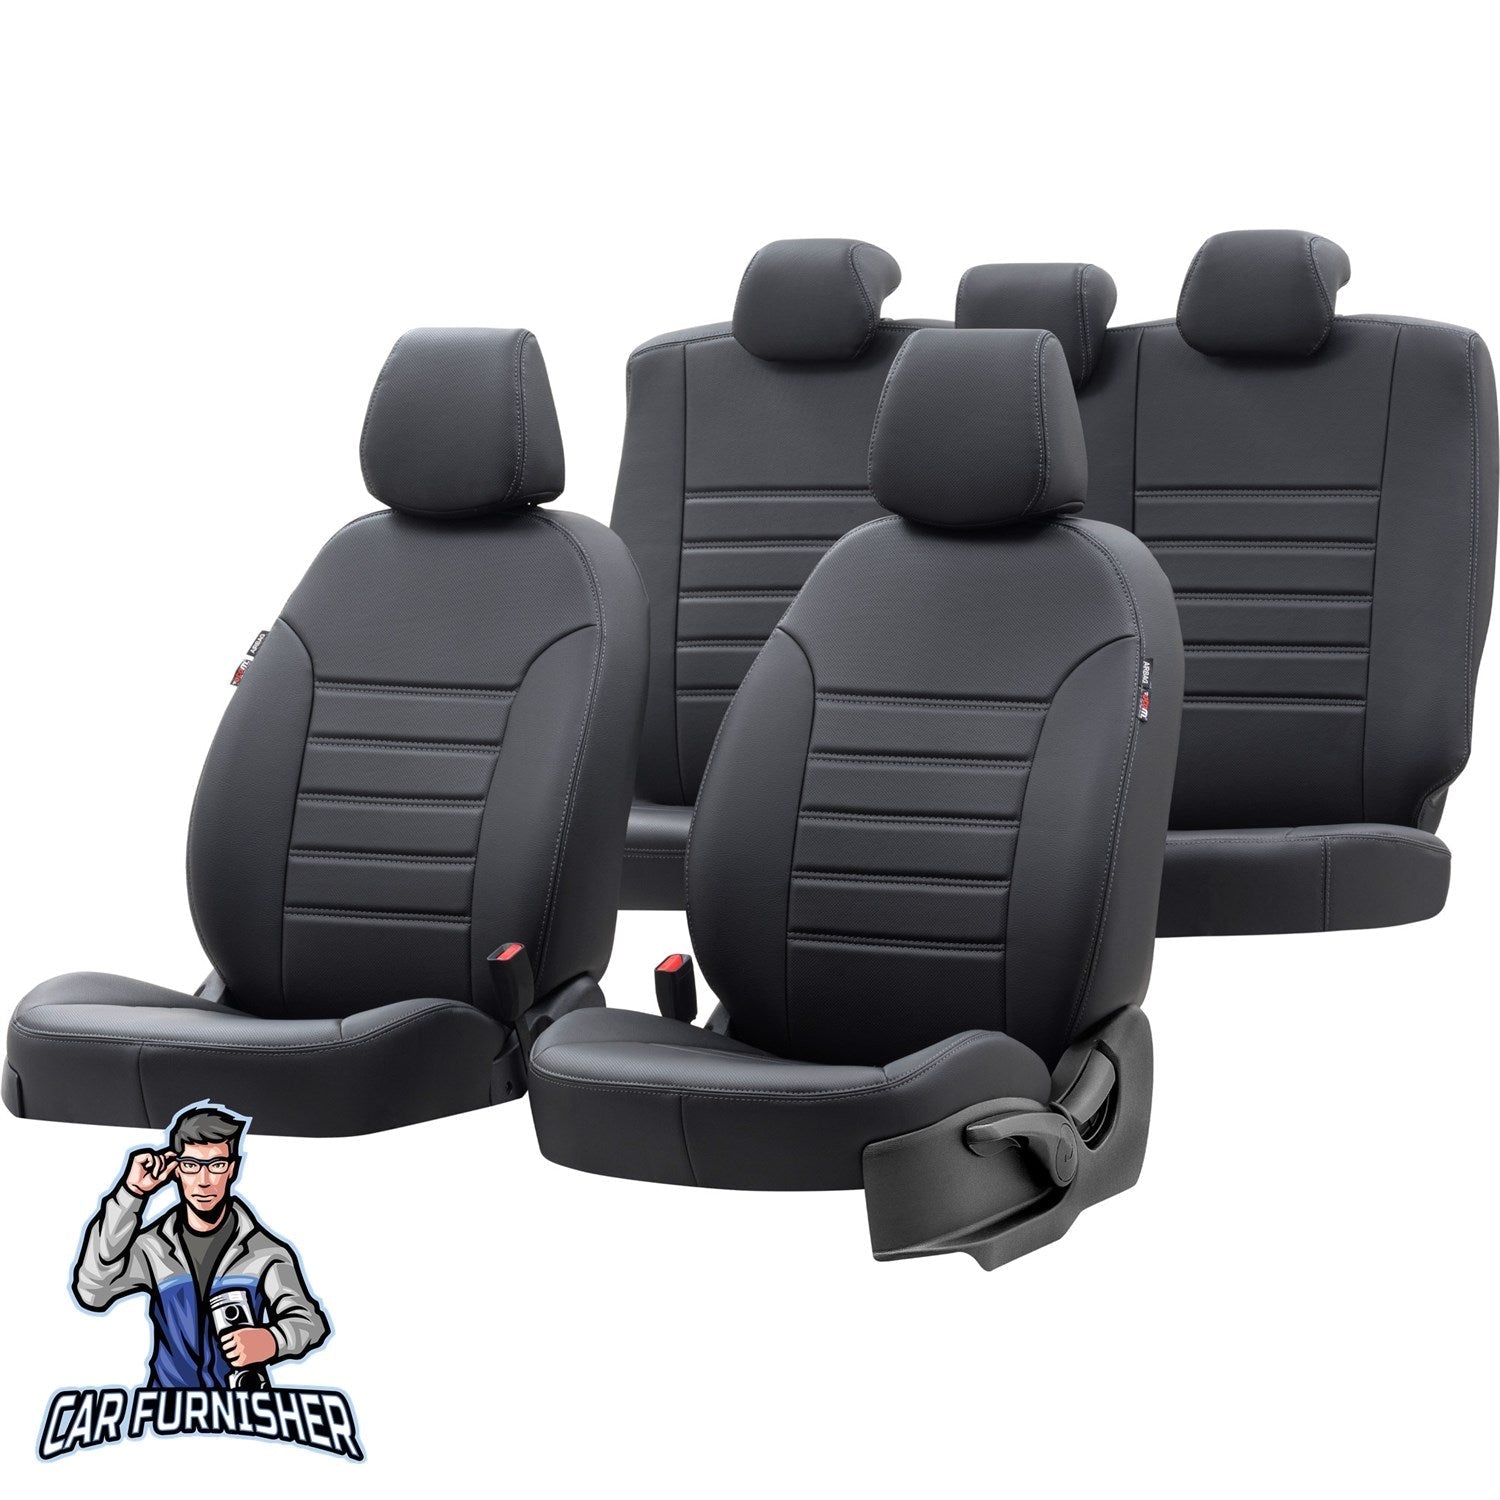 Citroen C5 Seat Covers Istanbul Leather Design Black Leather